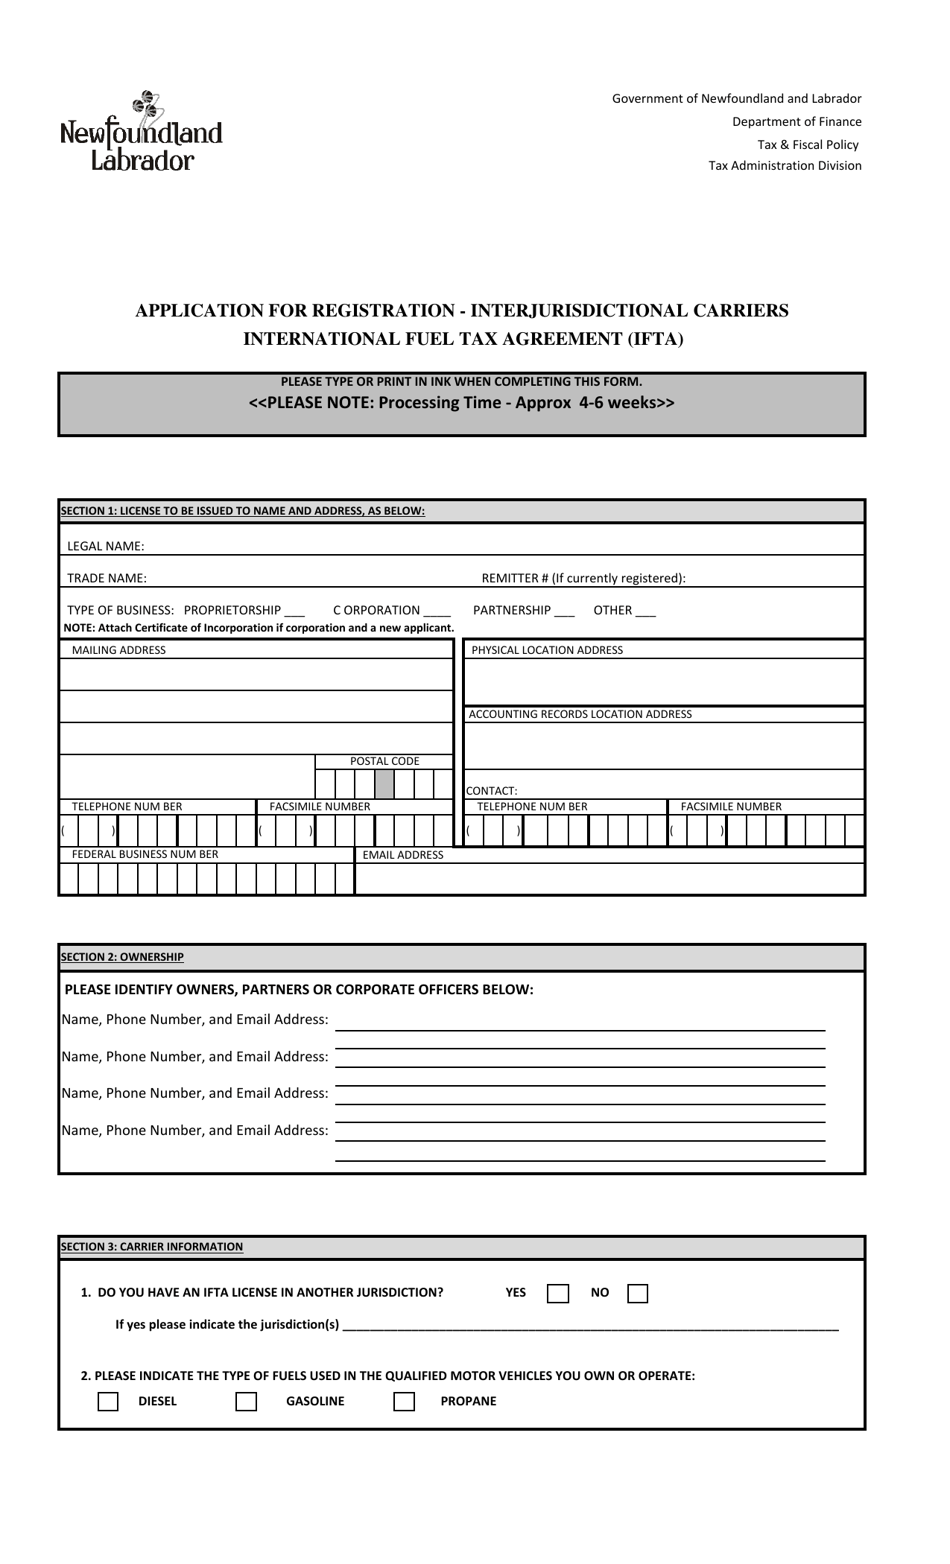 Application for Registration - Interjurisdictional Carriers - International Fuel Tax Agreement (Ifta) - Newfoundland and Labrador, Canada, Page 1